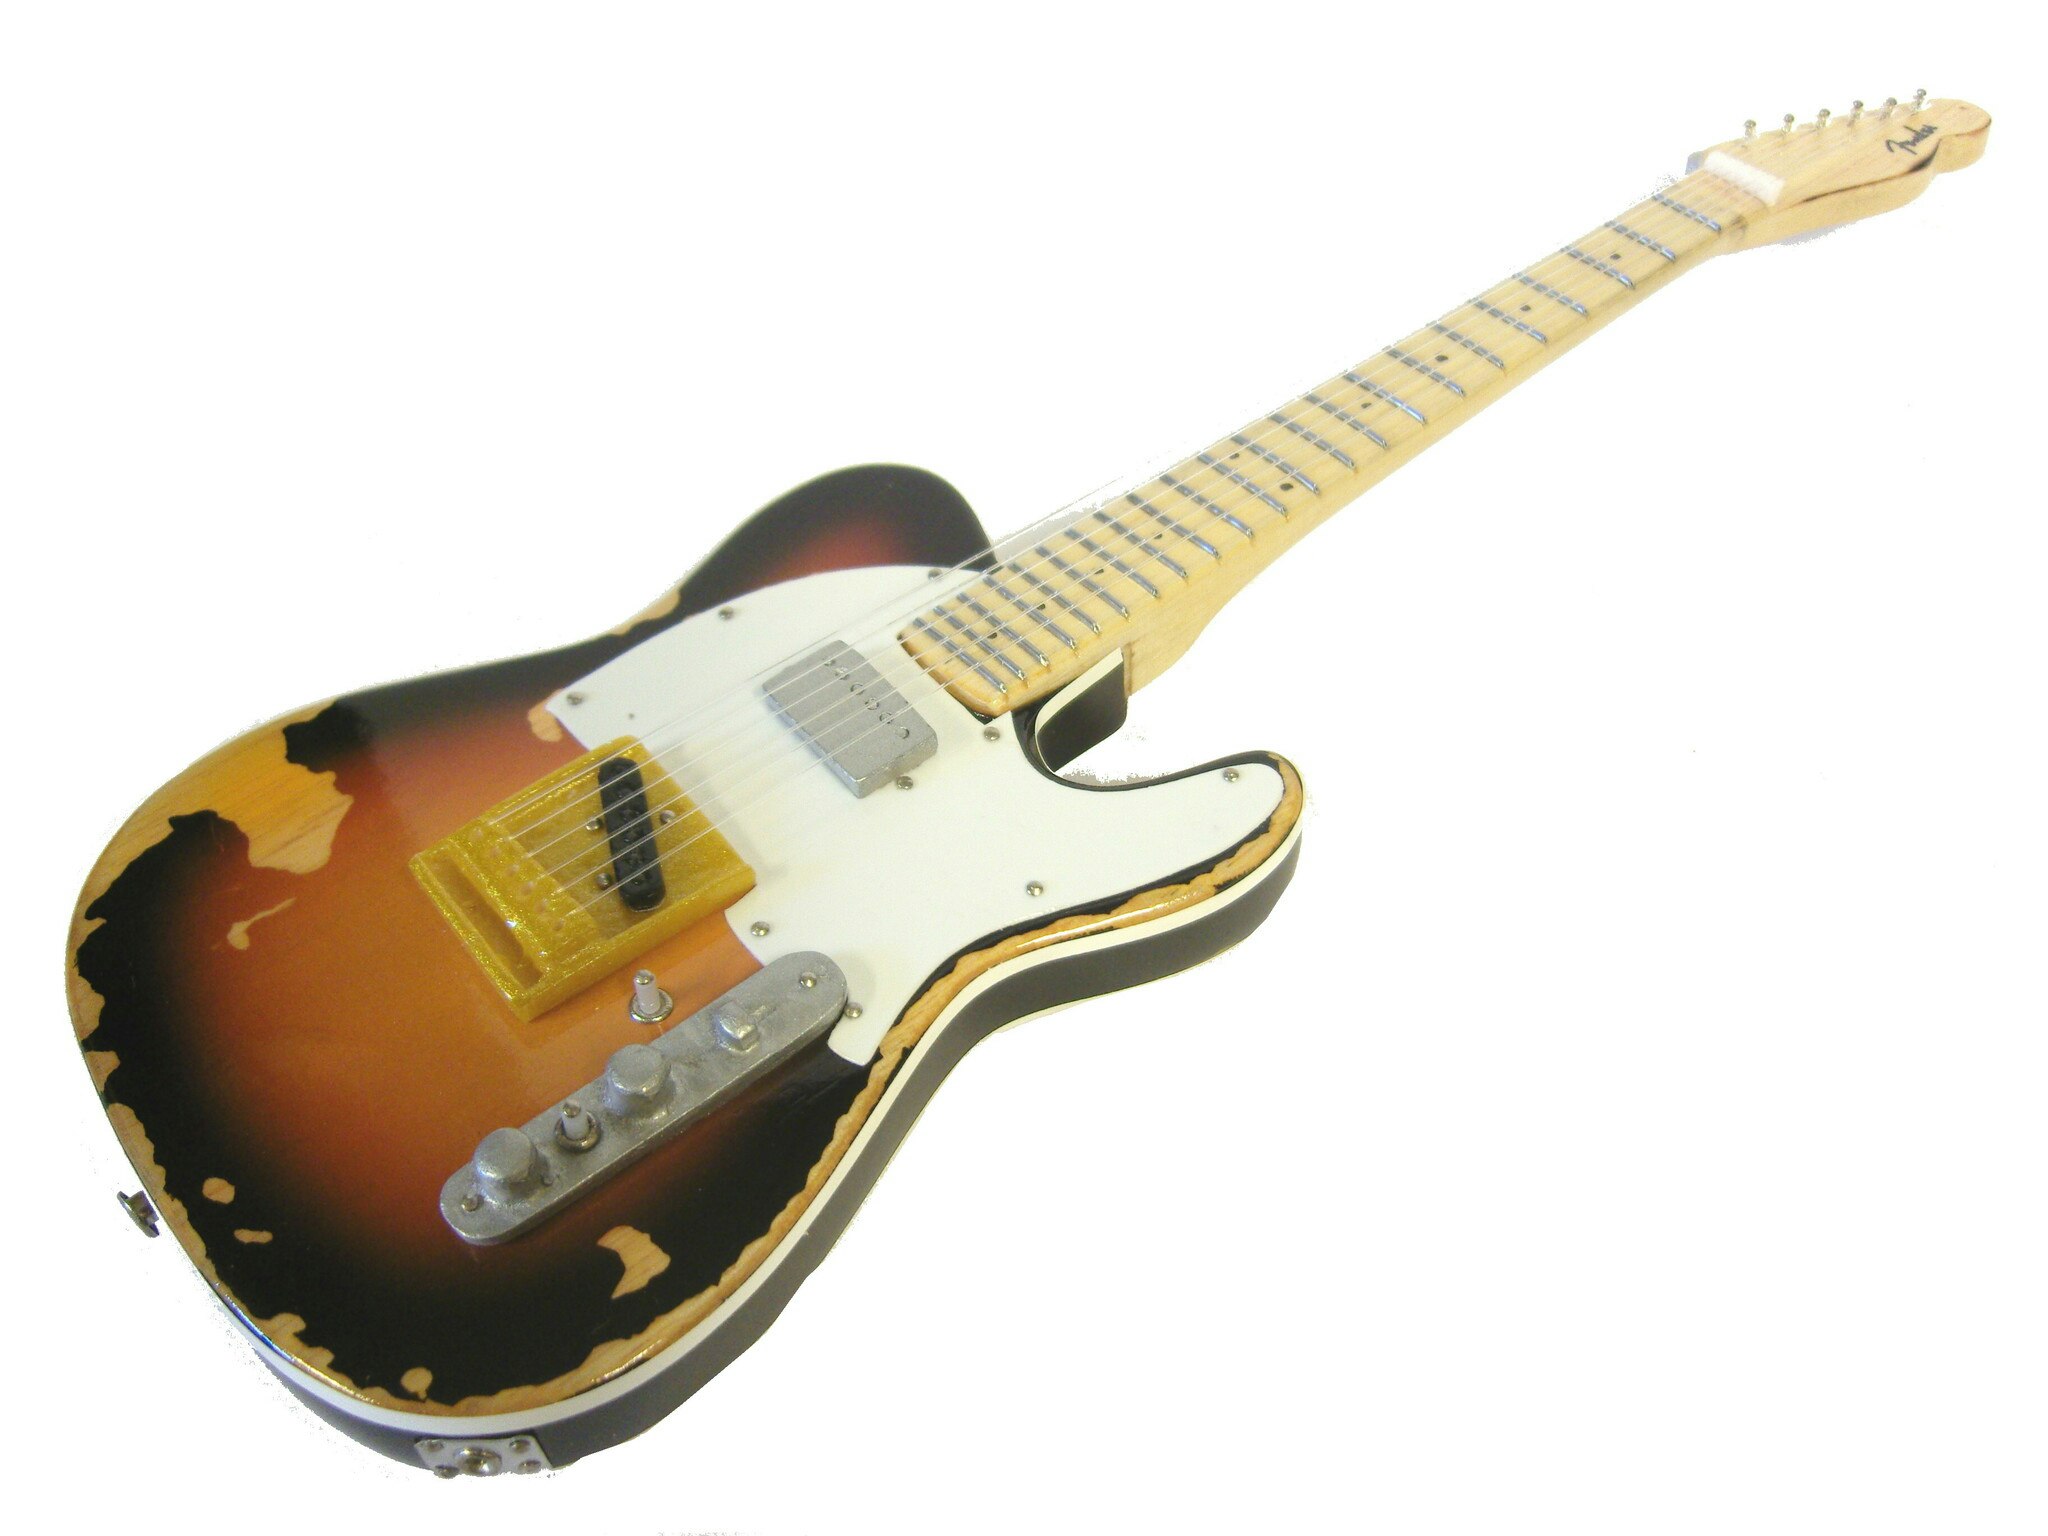 Andy Summers telecaster replica.